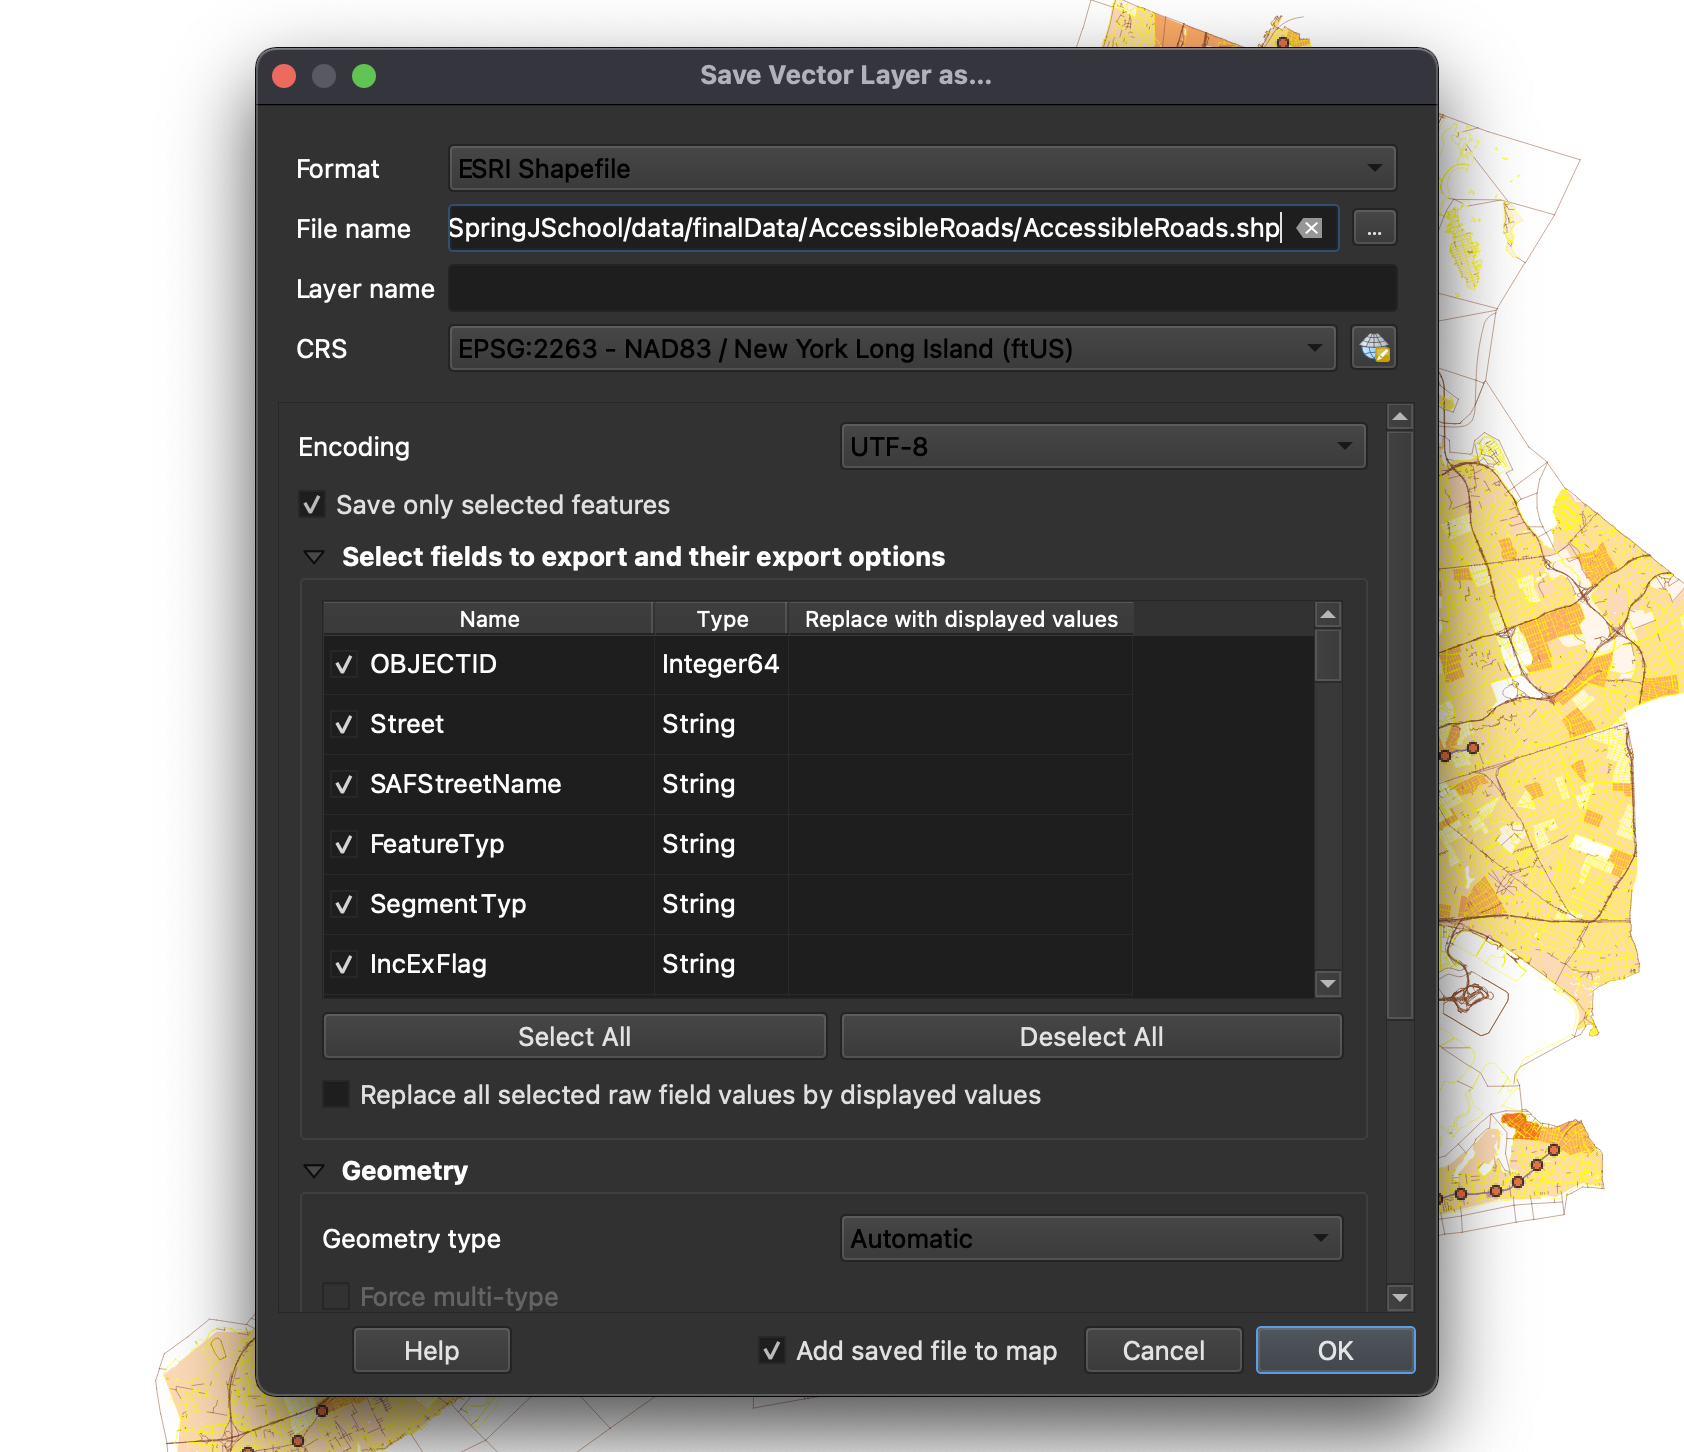 Export selected features